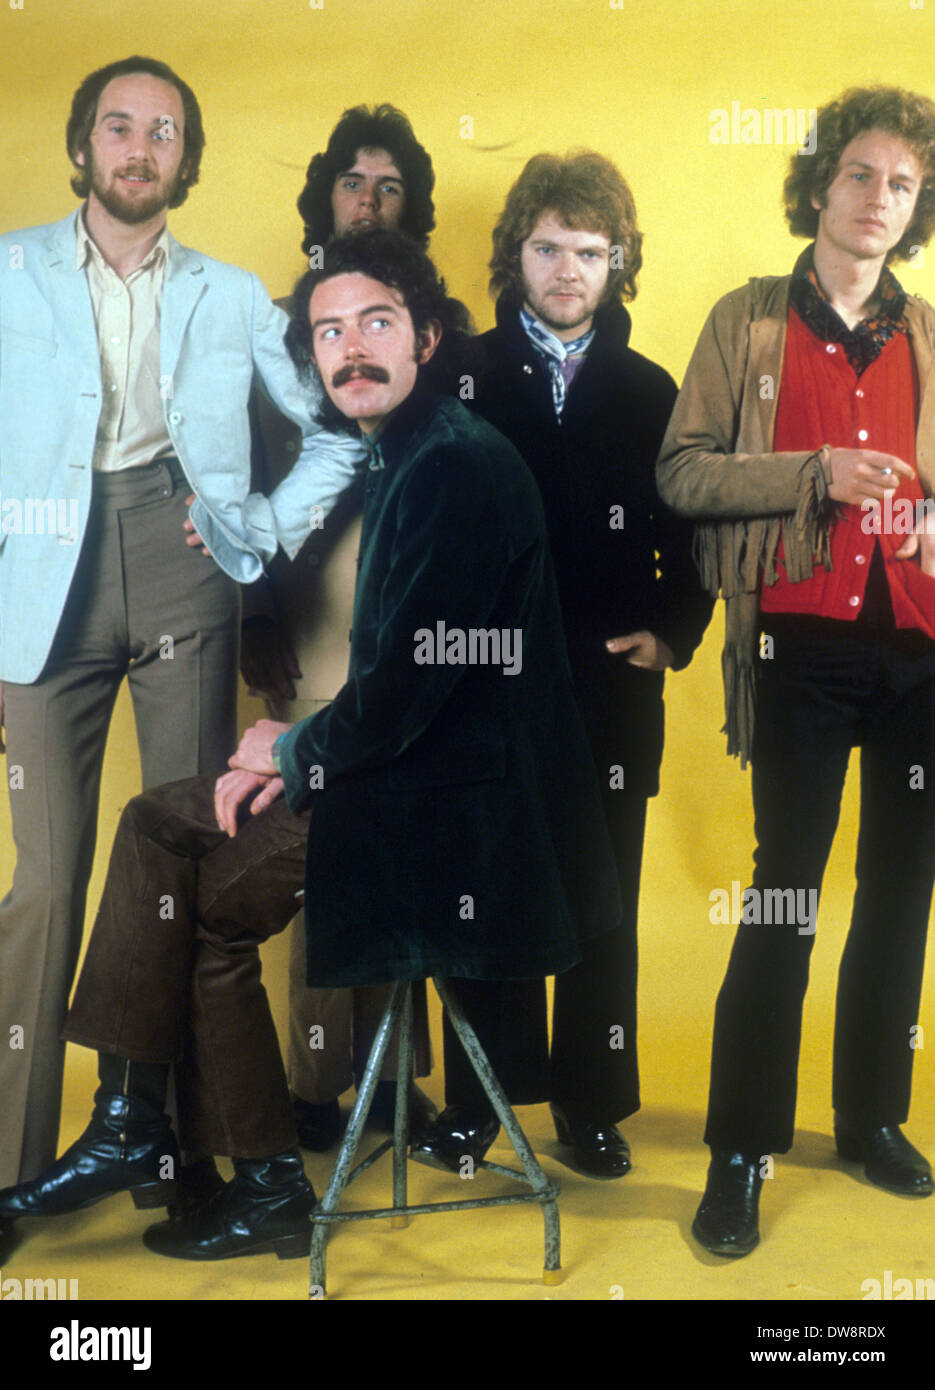 FAMILY UK rock group July 1968. From l: Rob Townsend, John Whitney, Jim King, Roger Chapman, Ric Grech seated. Photo Tony Gale Stock Photo